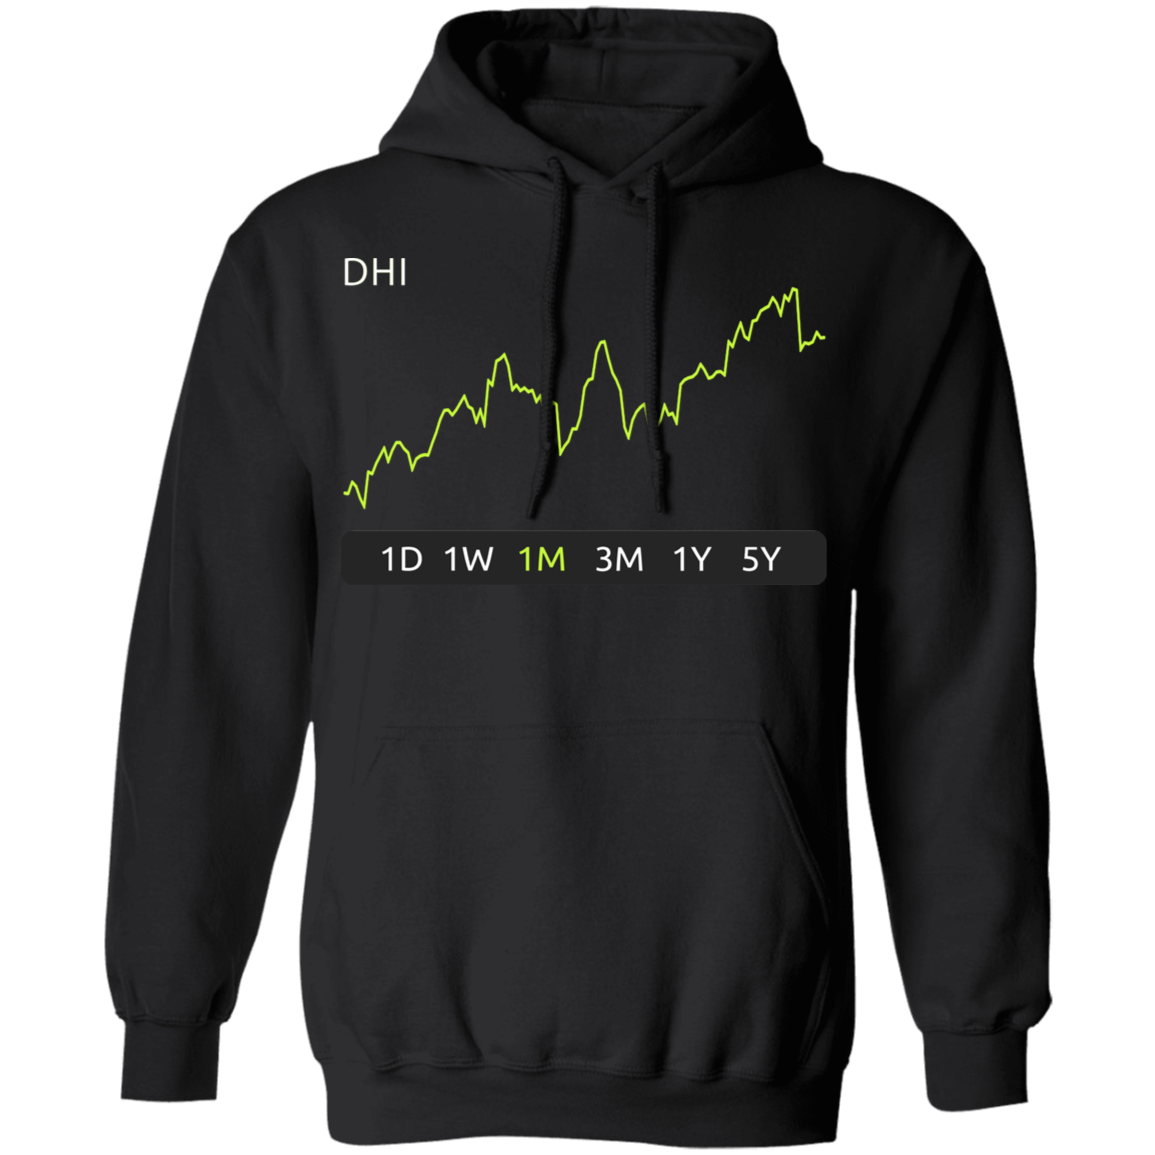 DHI Stock 1m Pullover Hoodie